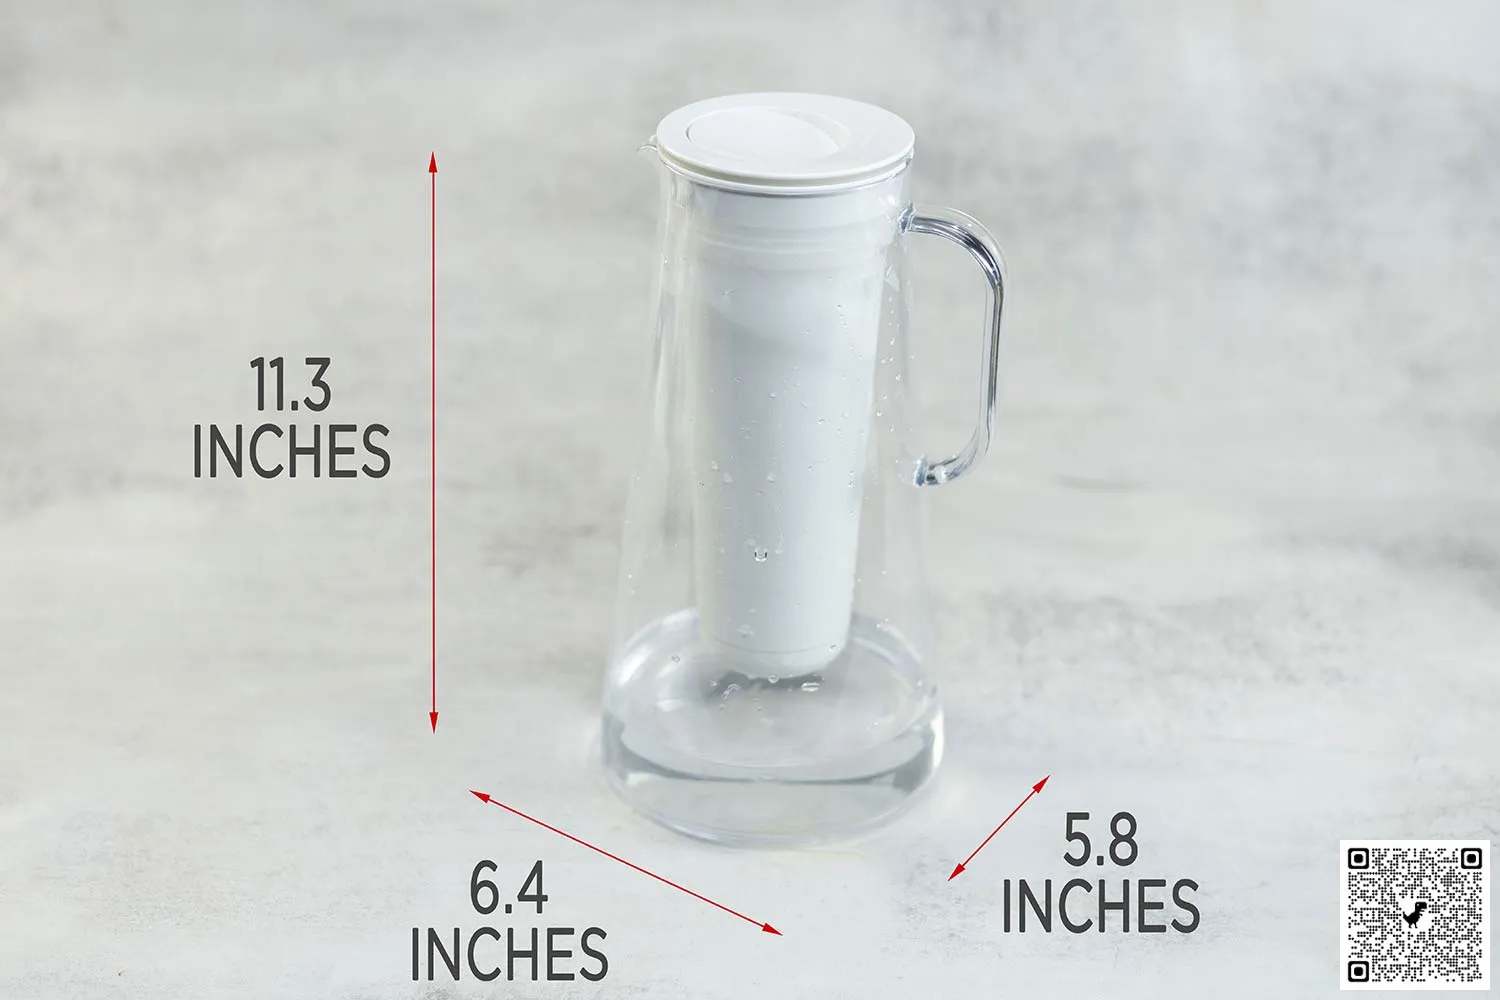 https://cdn.healthykitchen101.com/reviews/images/water-filters/lifestraw-pitcher-7-cup-dimensions-clm5tv8zr003ia18828yn02vb.jpg